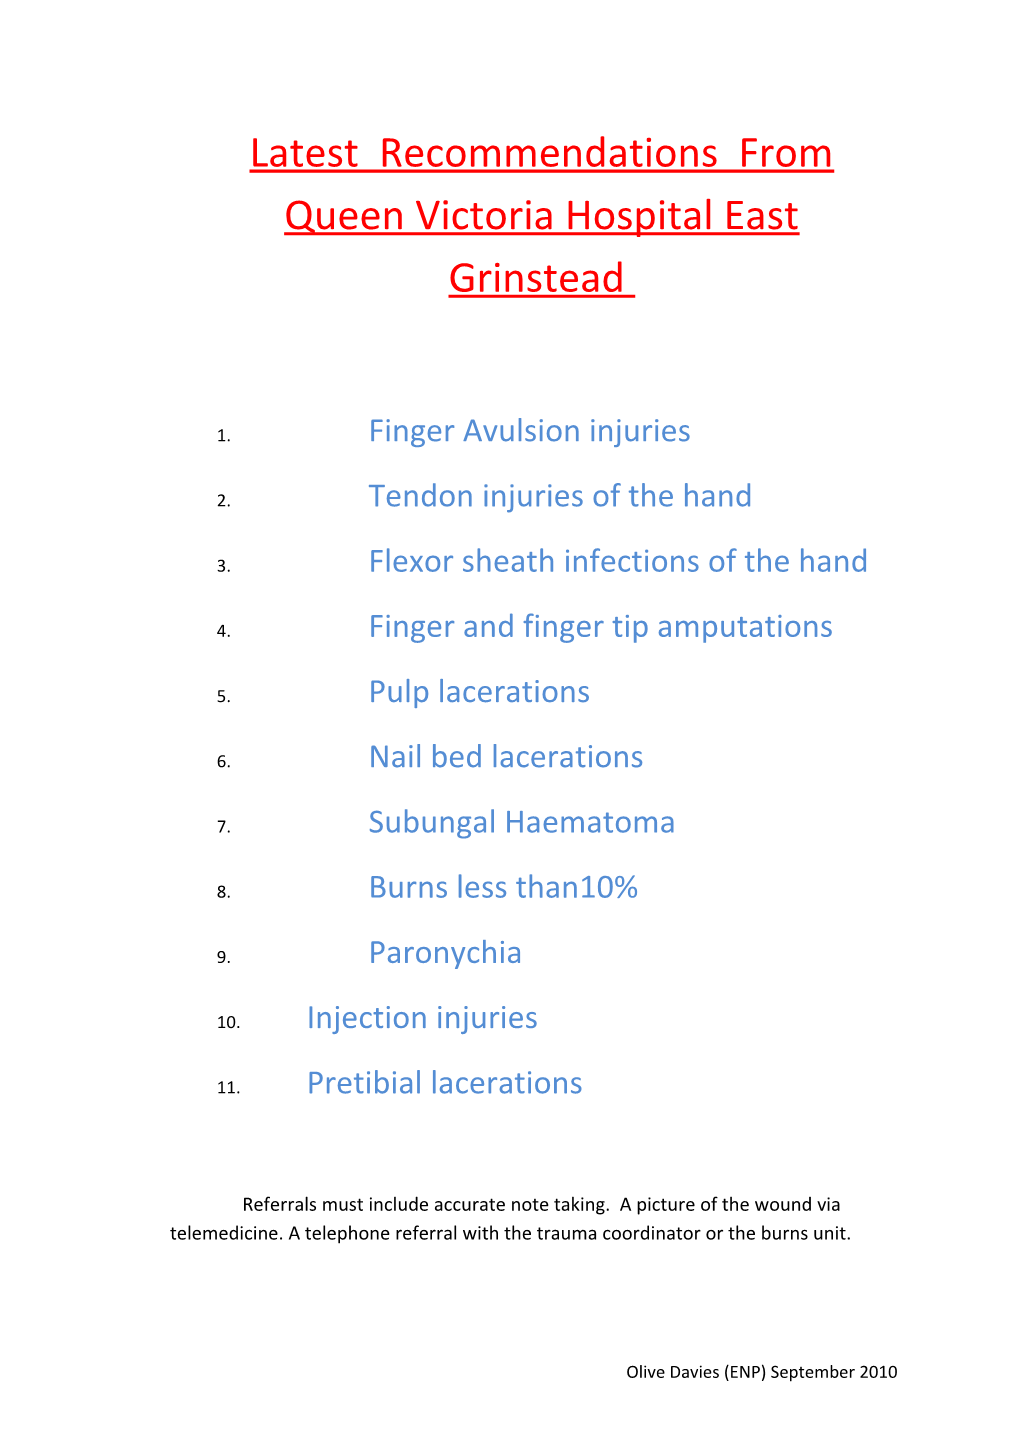 Latest Recommendations from Queen Victoria Hospital East Grindstead